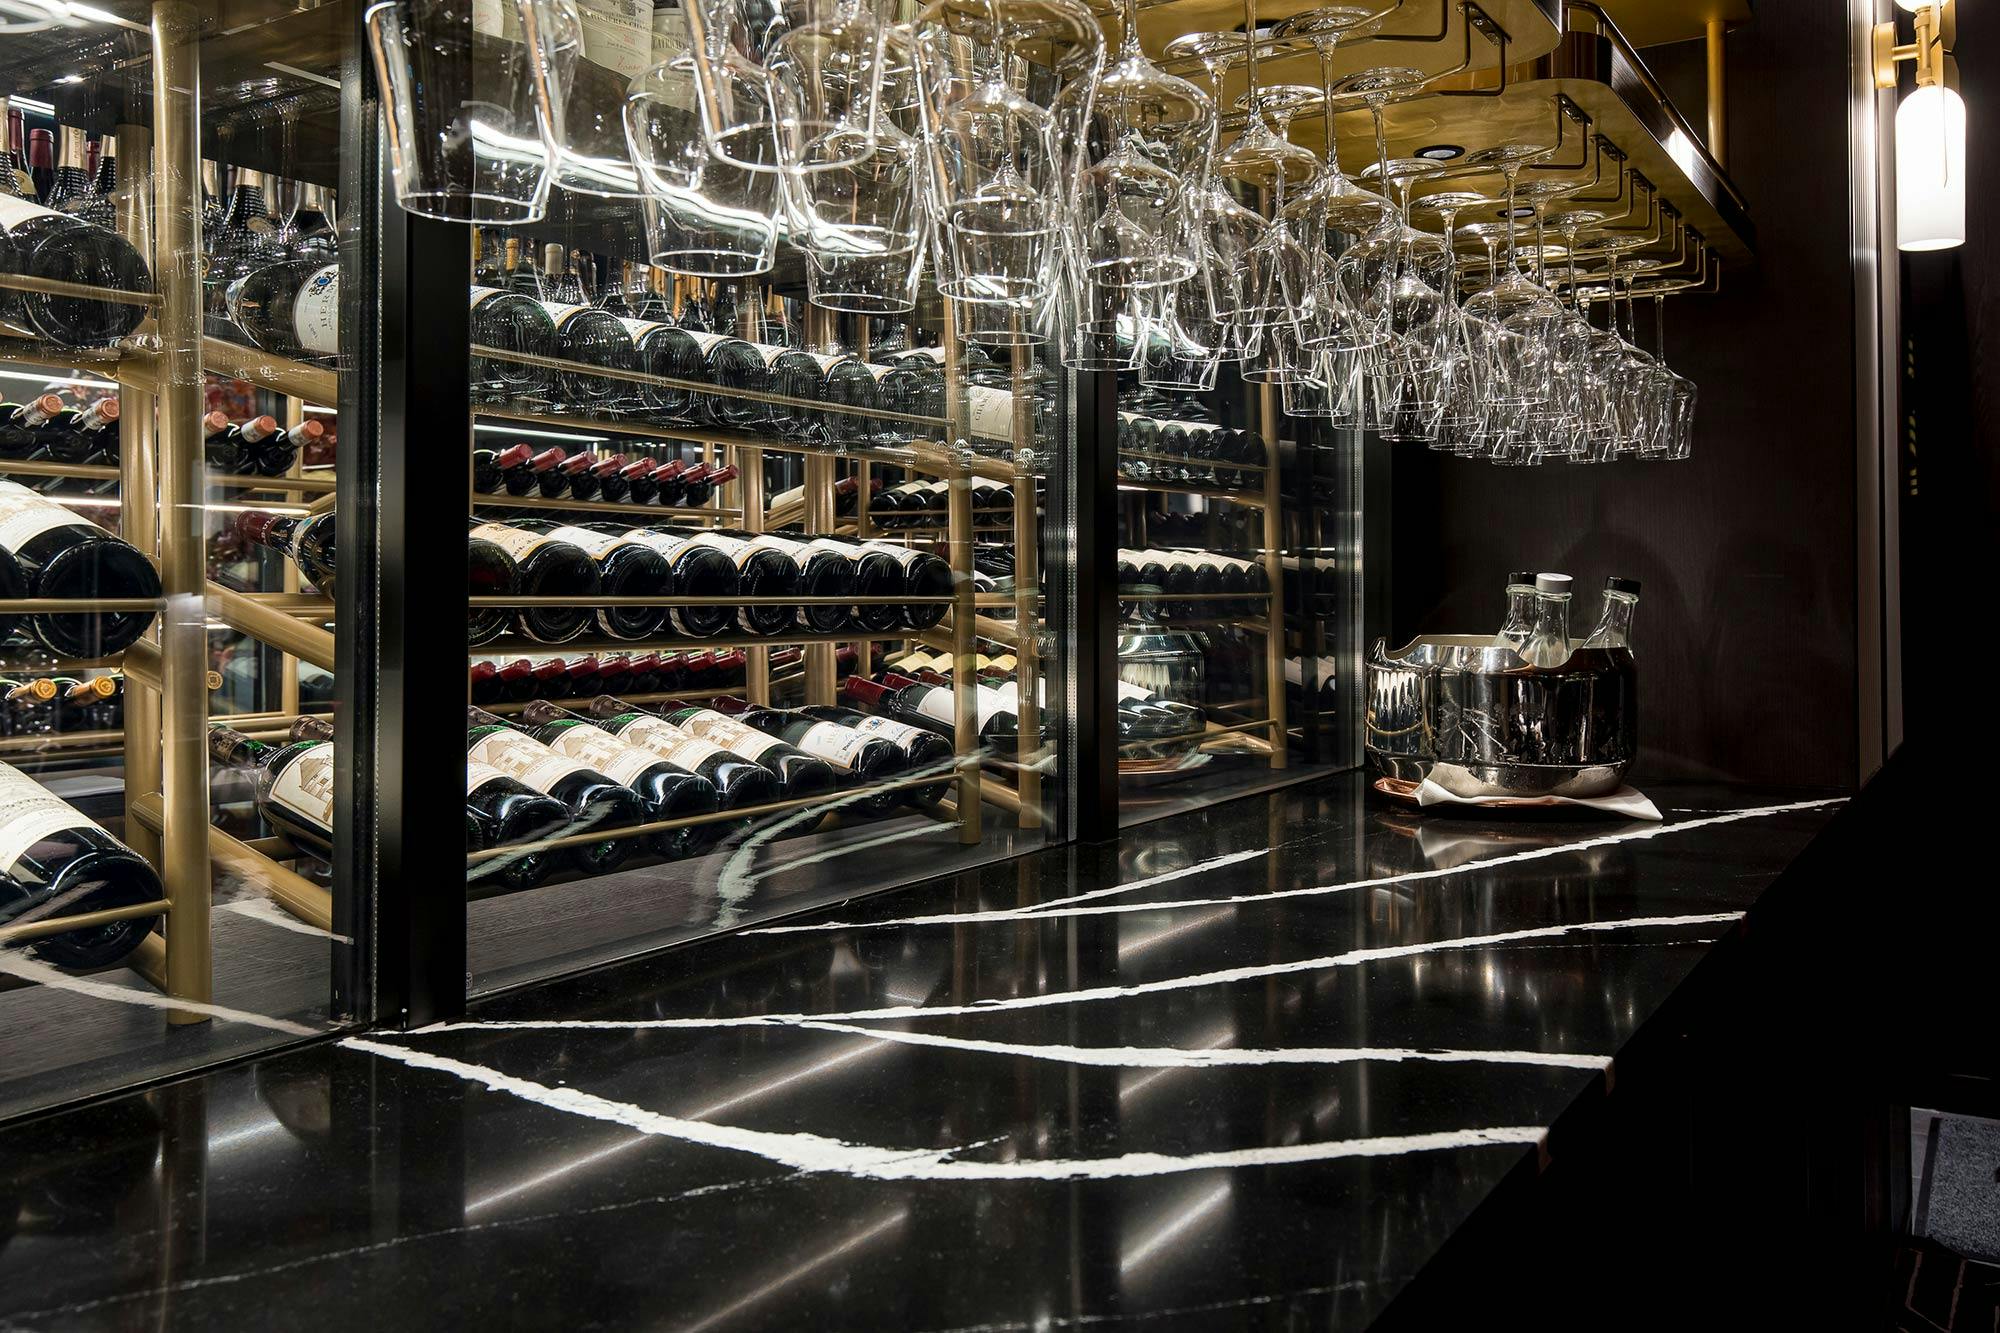 Numéro d'image 43 de la section actuelle de This ground-breaking haute cuisine restaurant in Singapore relies on Cosentino’s functionality and elegance de Cosentino France